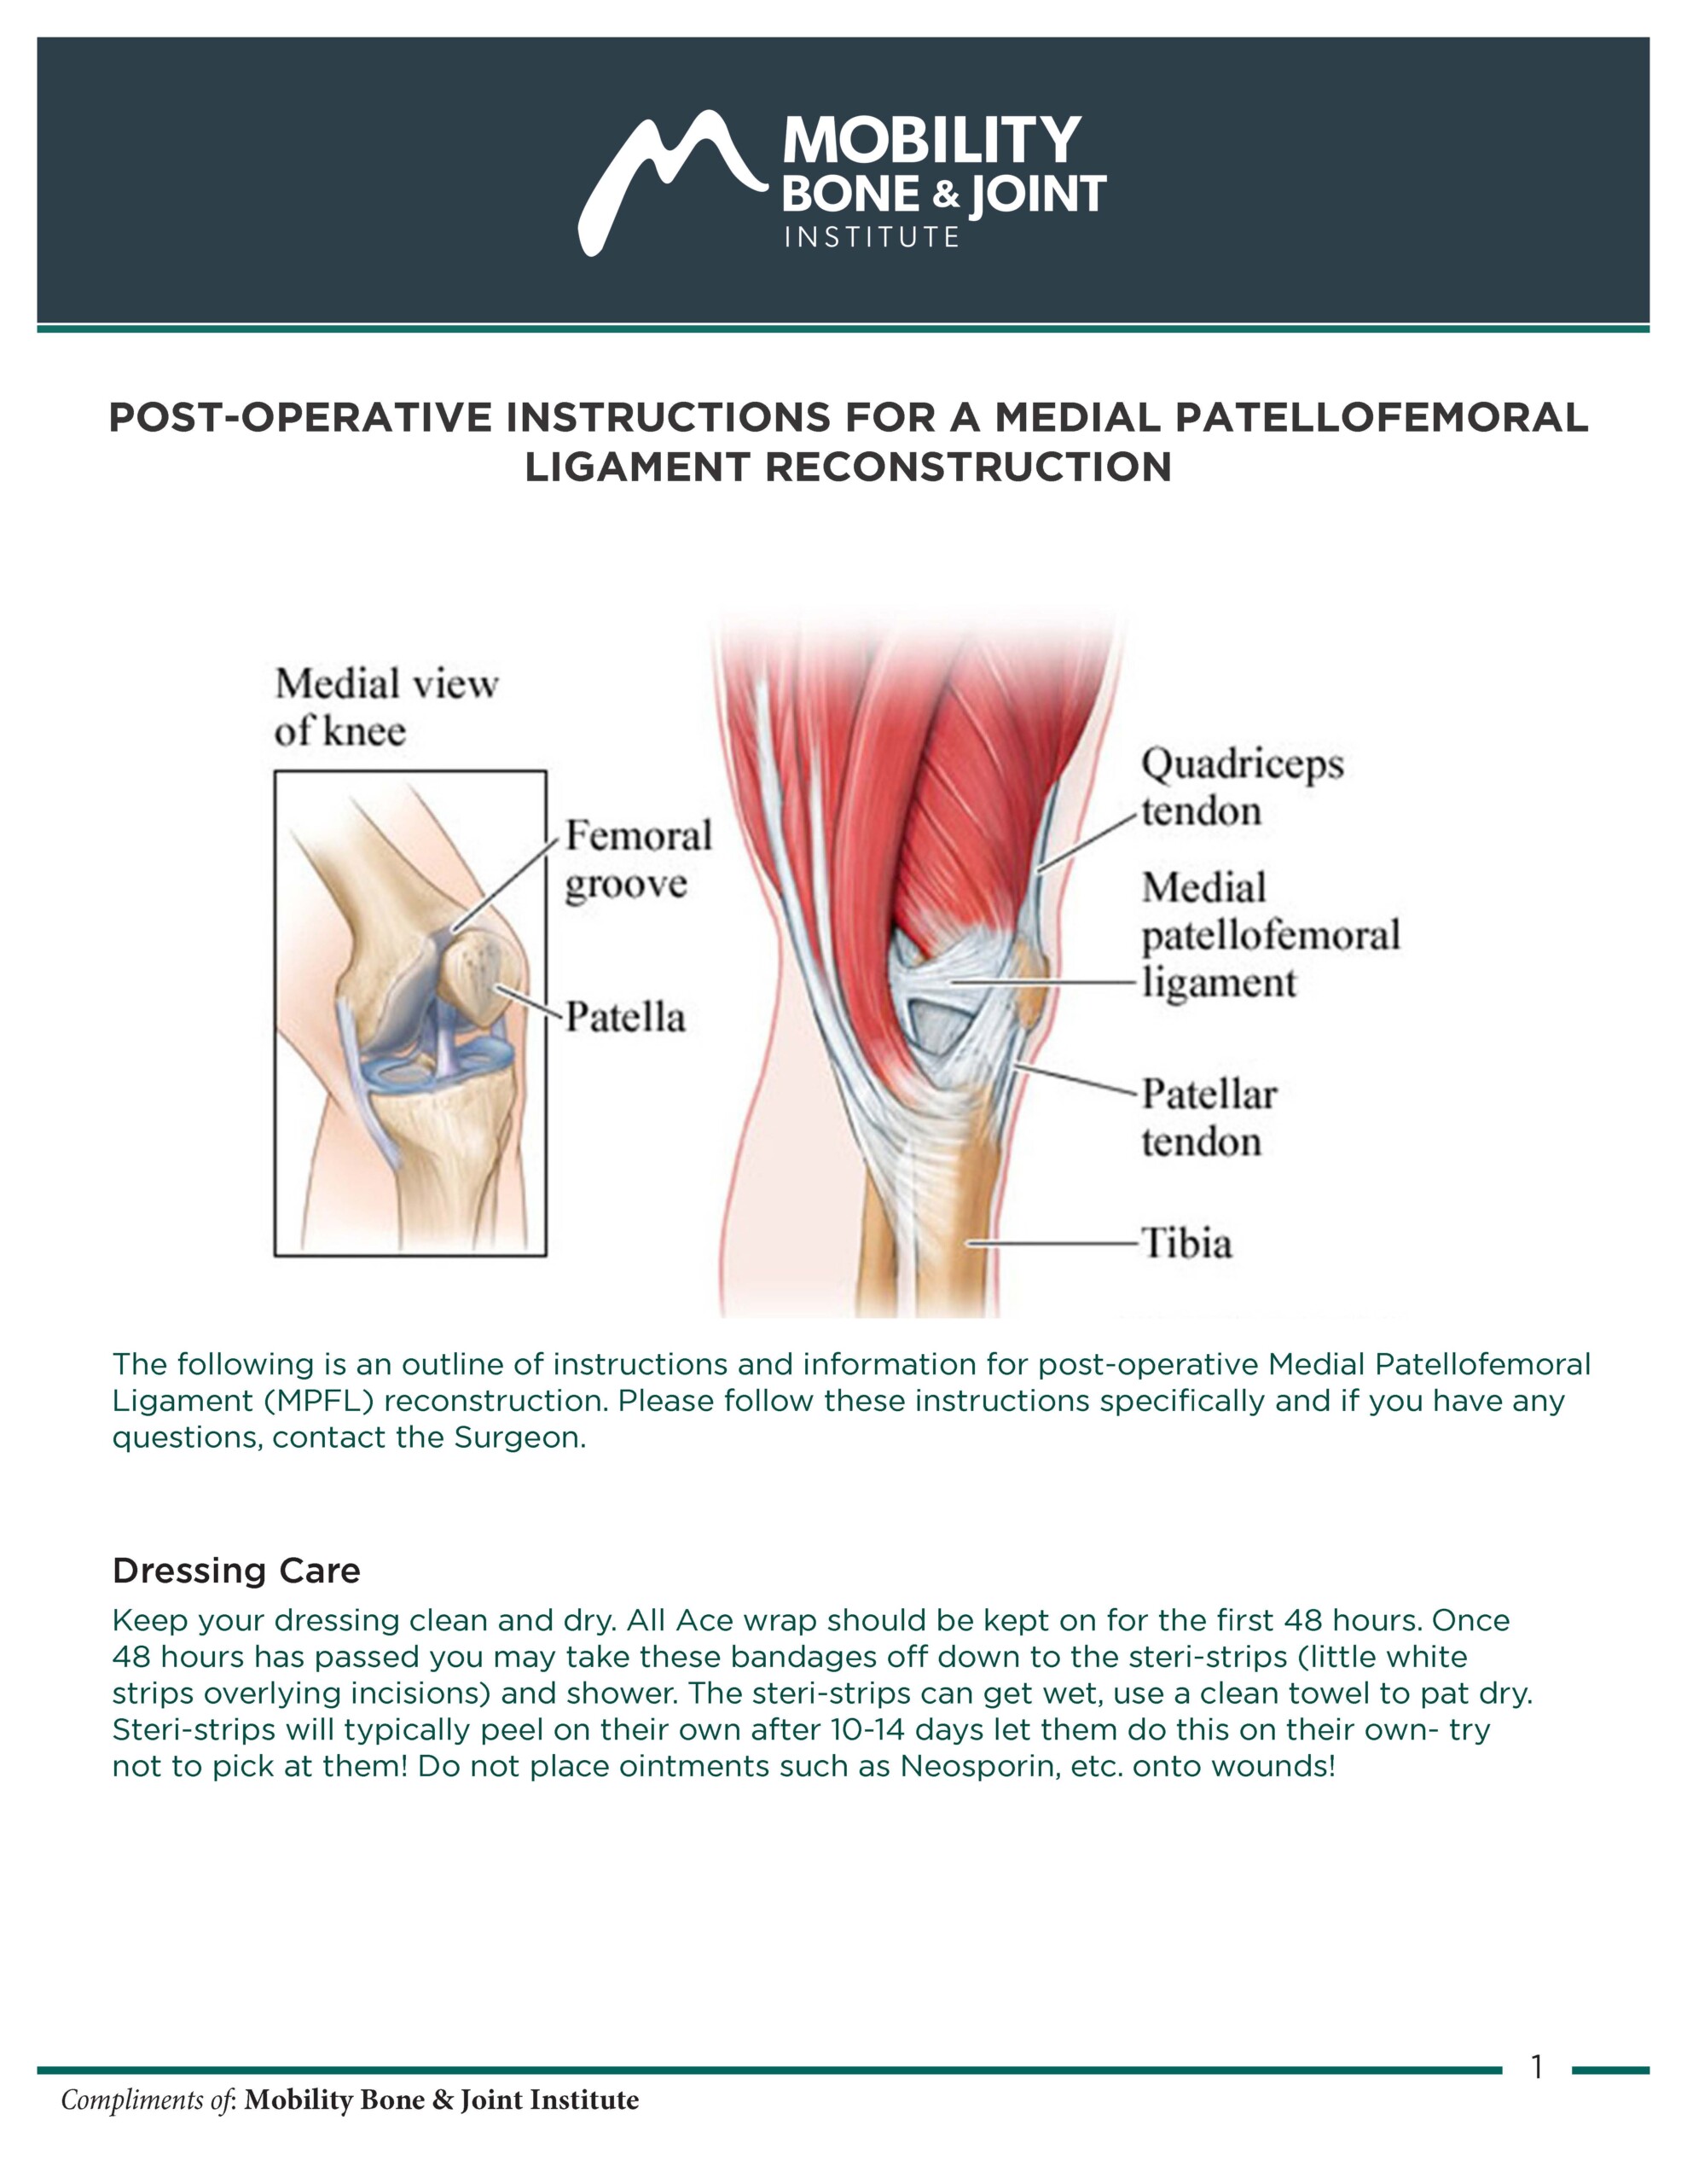 POST-OPERATIVE INSTRUCTIONS FOR A MEDIAL PATELLOFEMORAL LIGAMENT RECONSTRUCTION